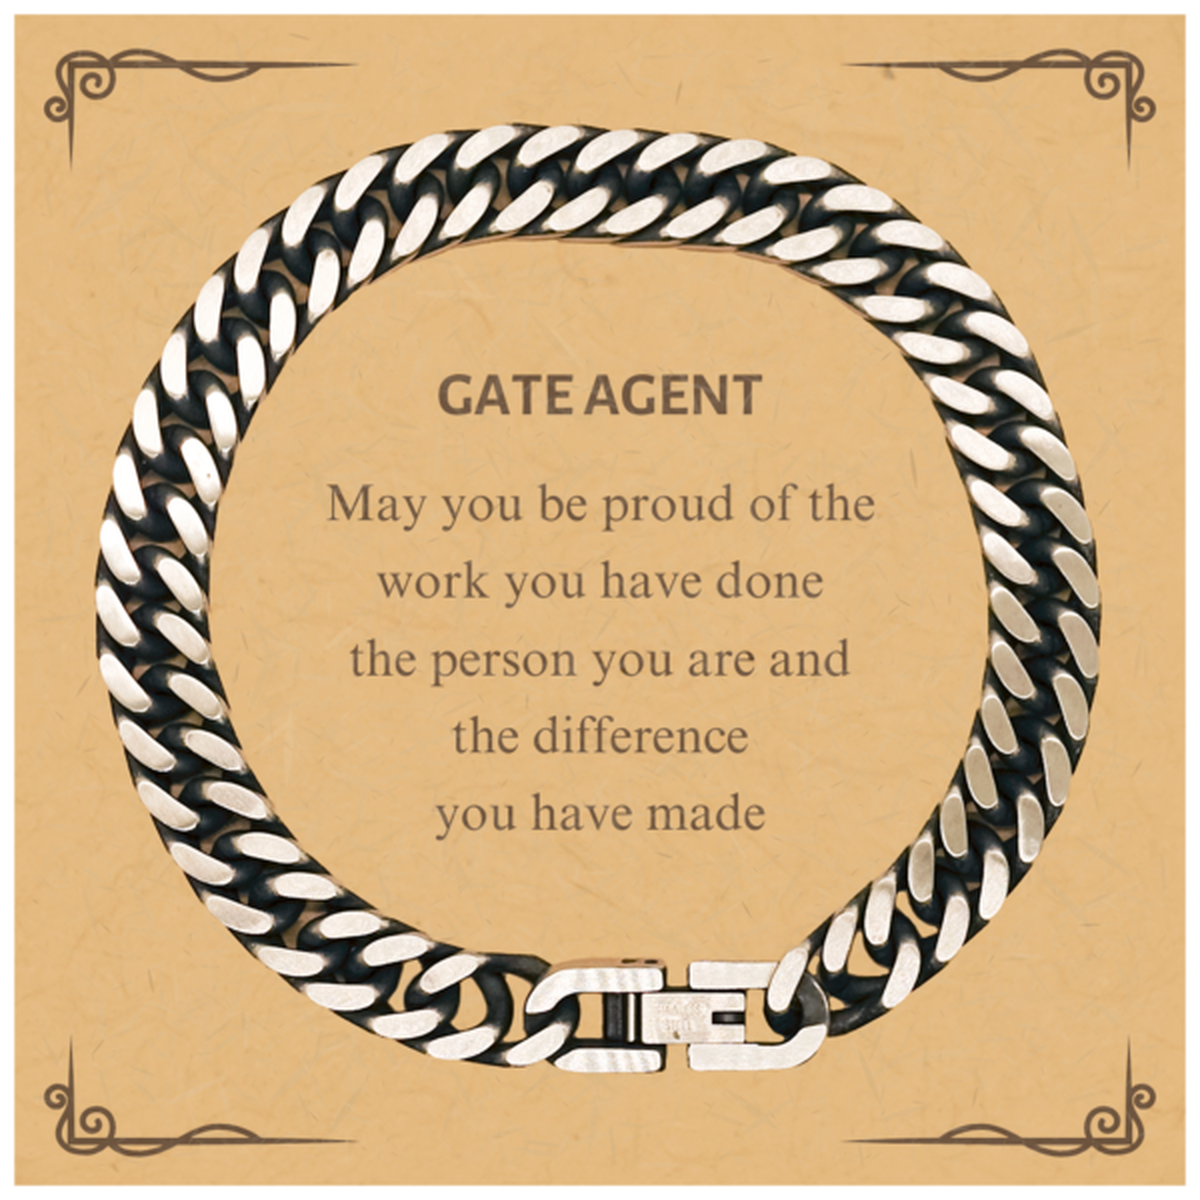 Gate Agent May you be proud of the work you have done, Retirement Gate Agent Cuban Link Chain Bracelet for Colleague Appreciation Gifts Amazing for Gate Agent